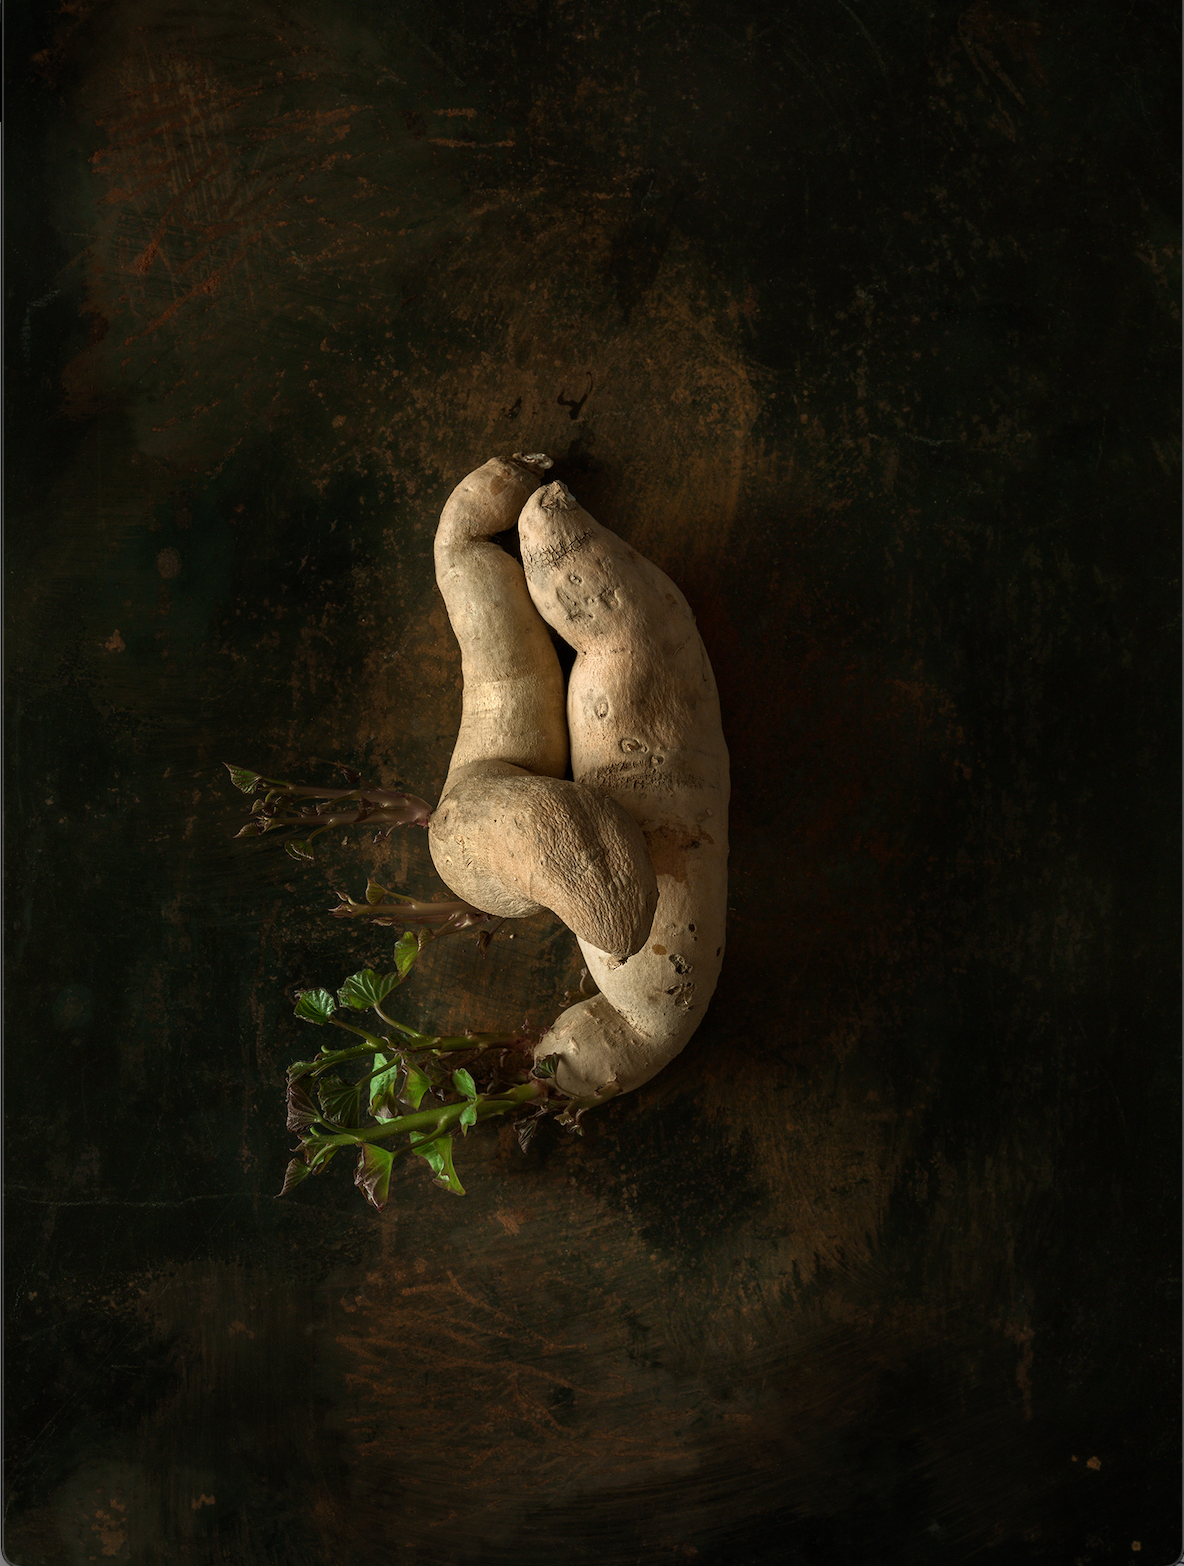 Beth Galton, 'Fingerling Sweet potatoes from Union Square Greenmarket, N.Y, N.Y; propagation period: 12 and 6 days in East-facing window'